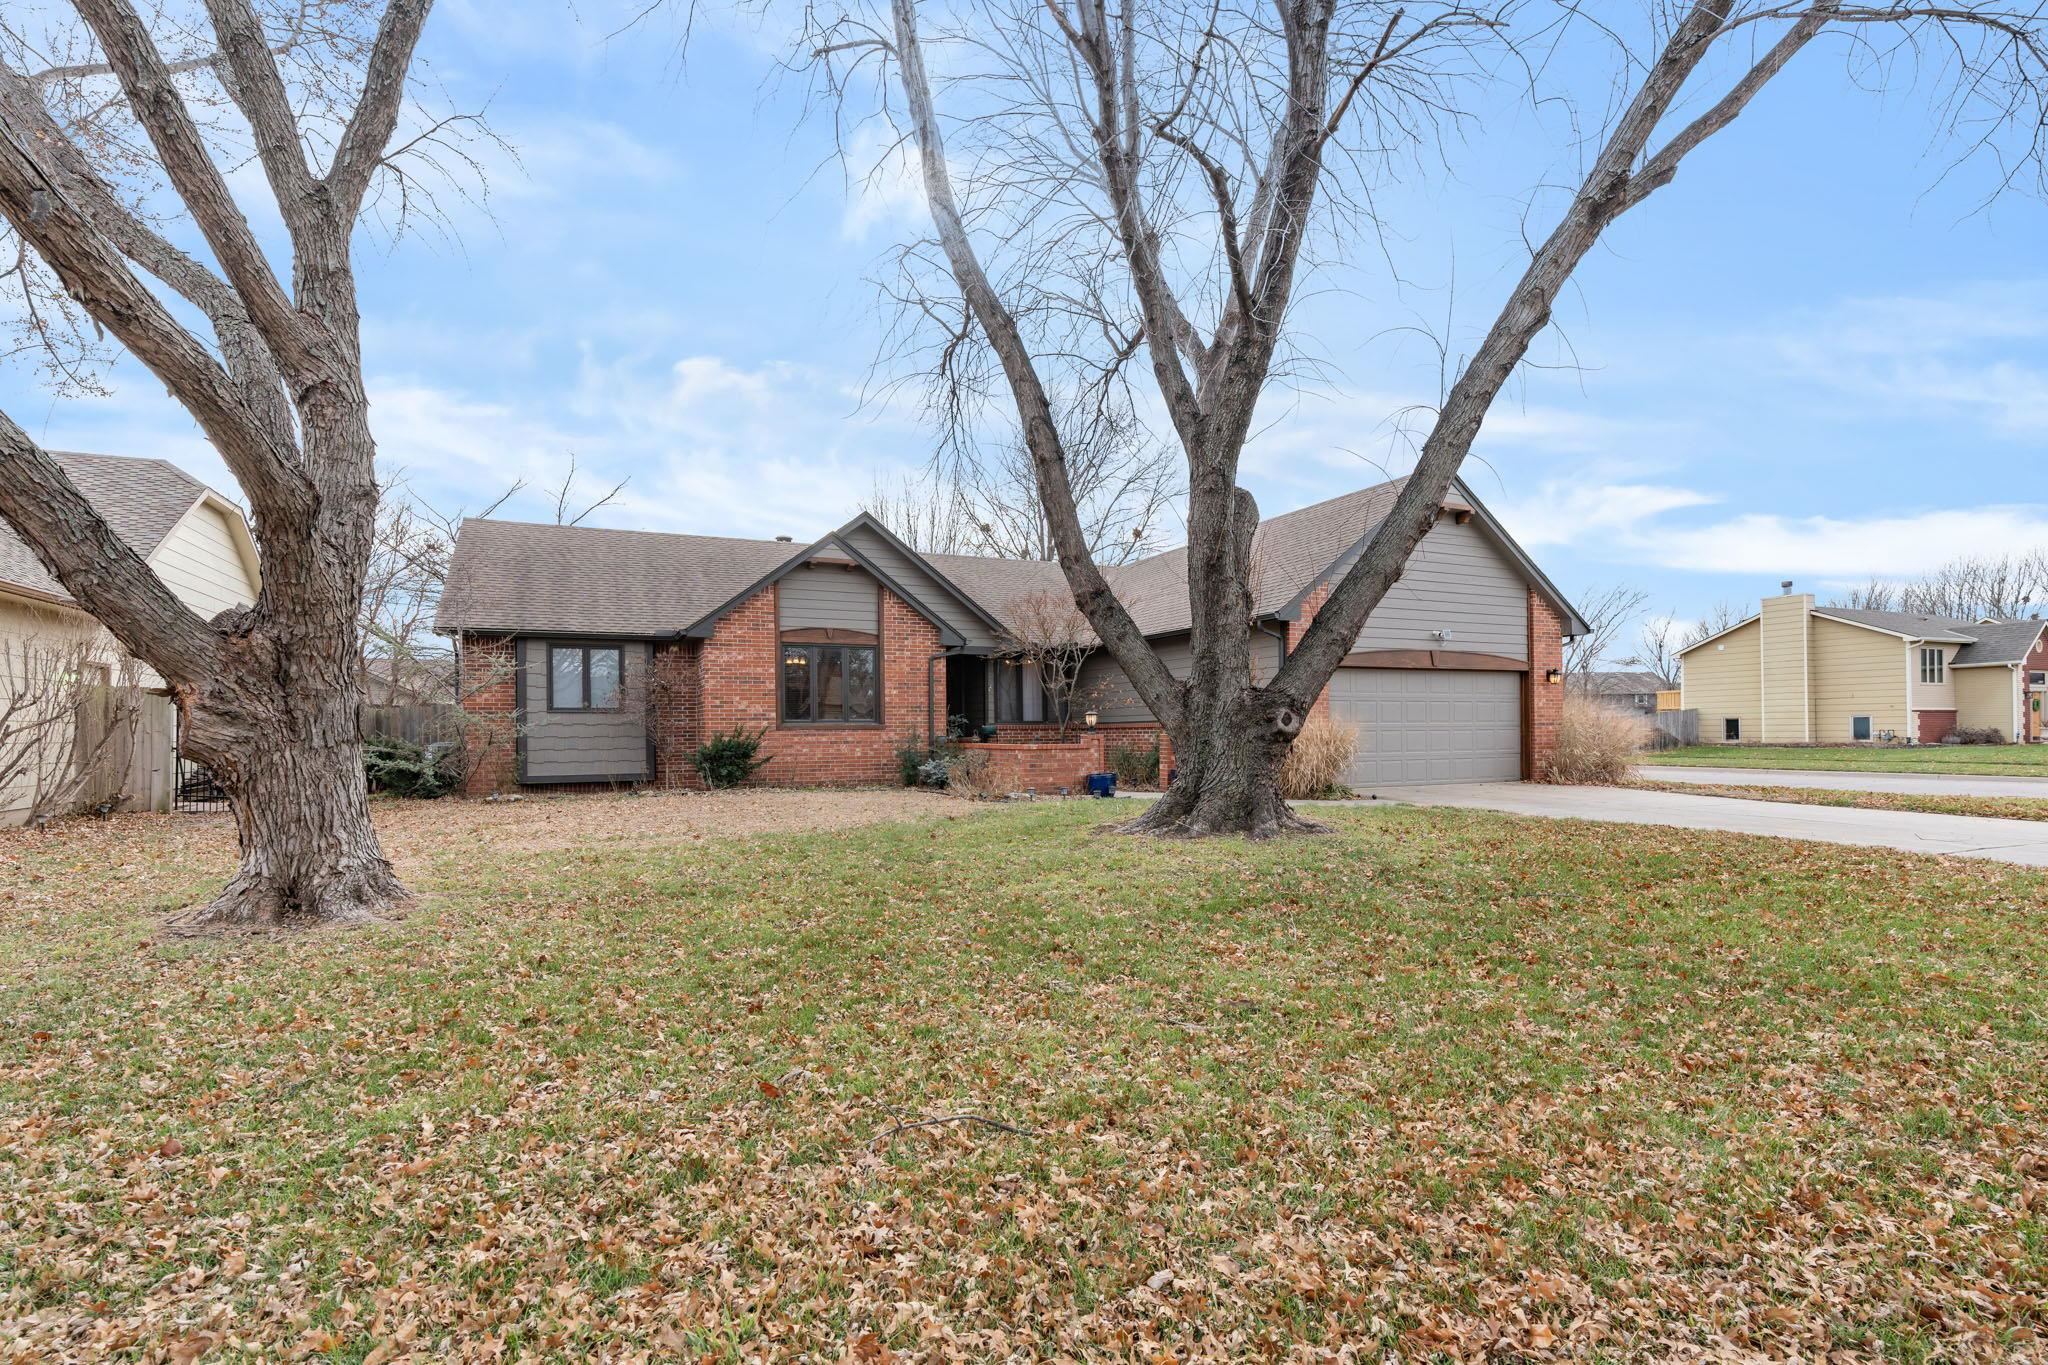 Located in Northwest Wichita, this home is minutes away from an abundance of options for shopping, d